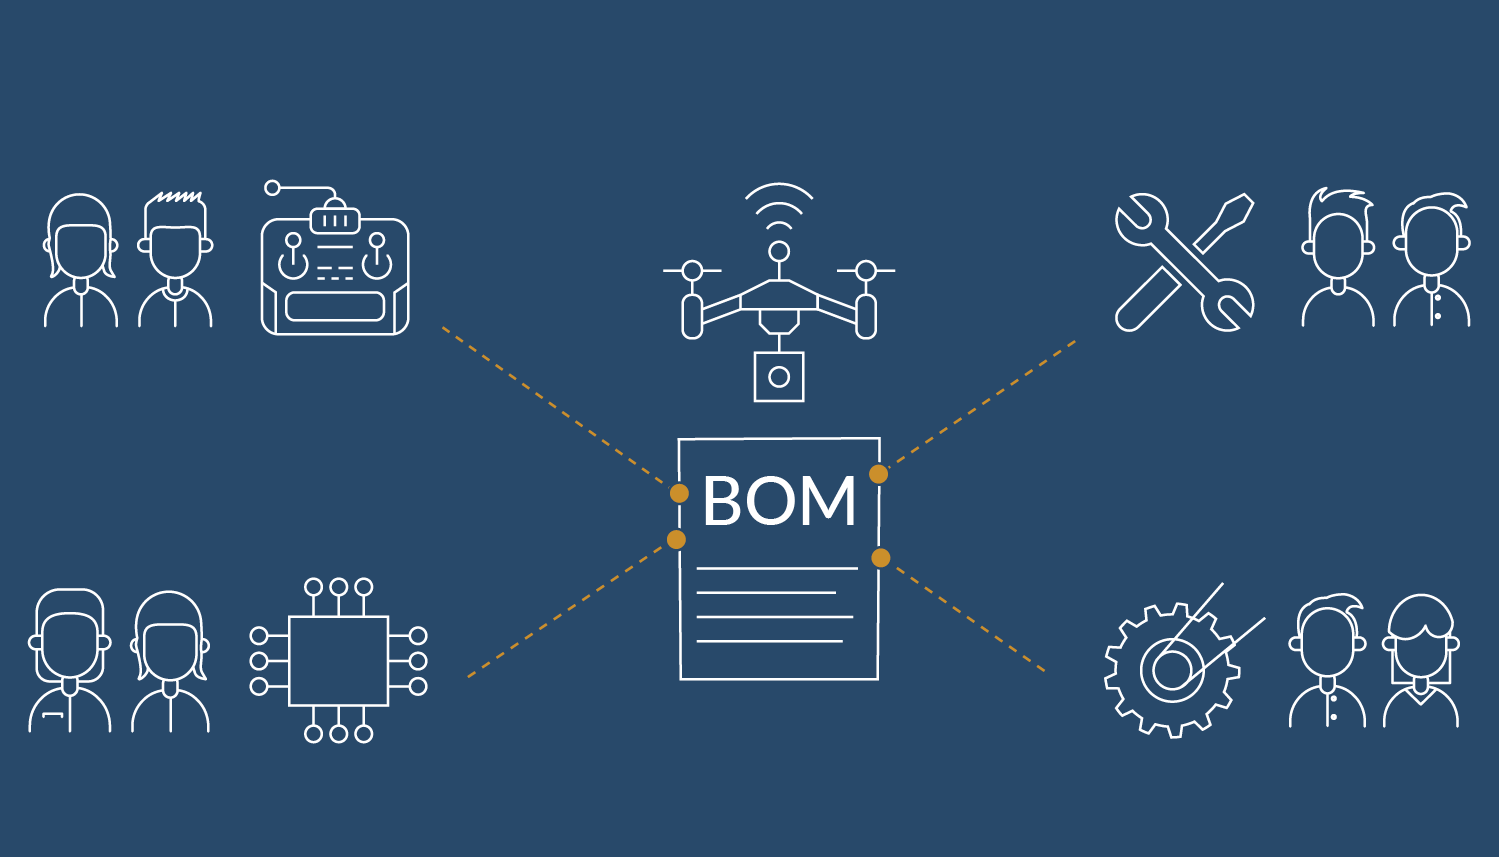 Bill of material BOM management across departments, disciplines, and domains